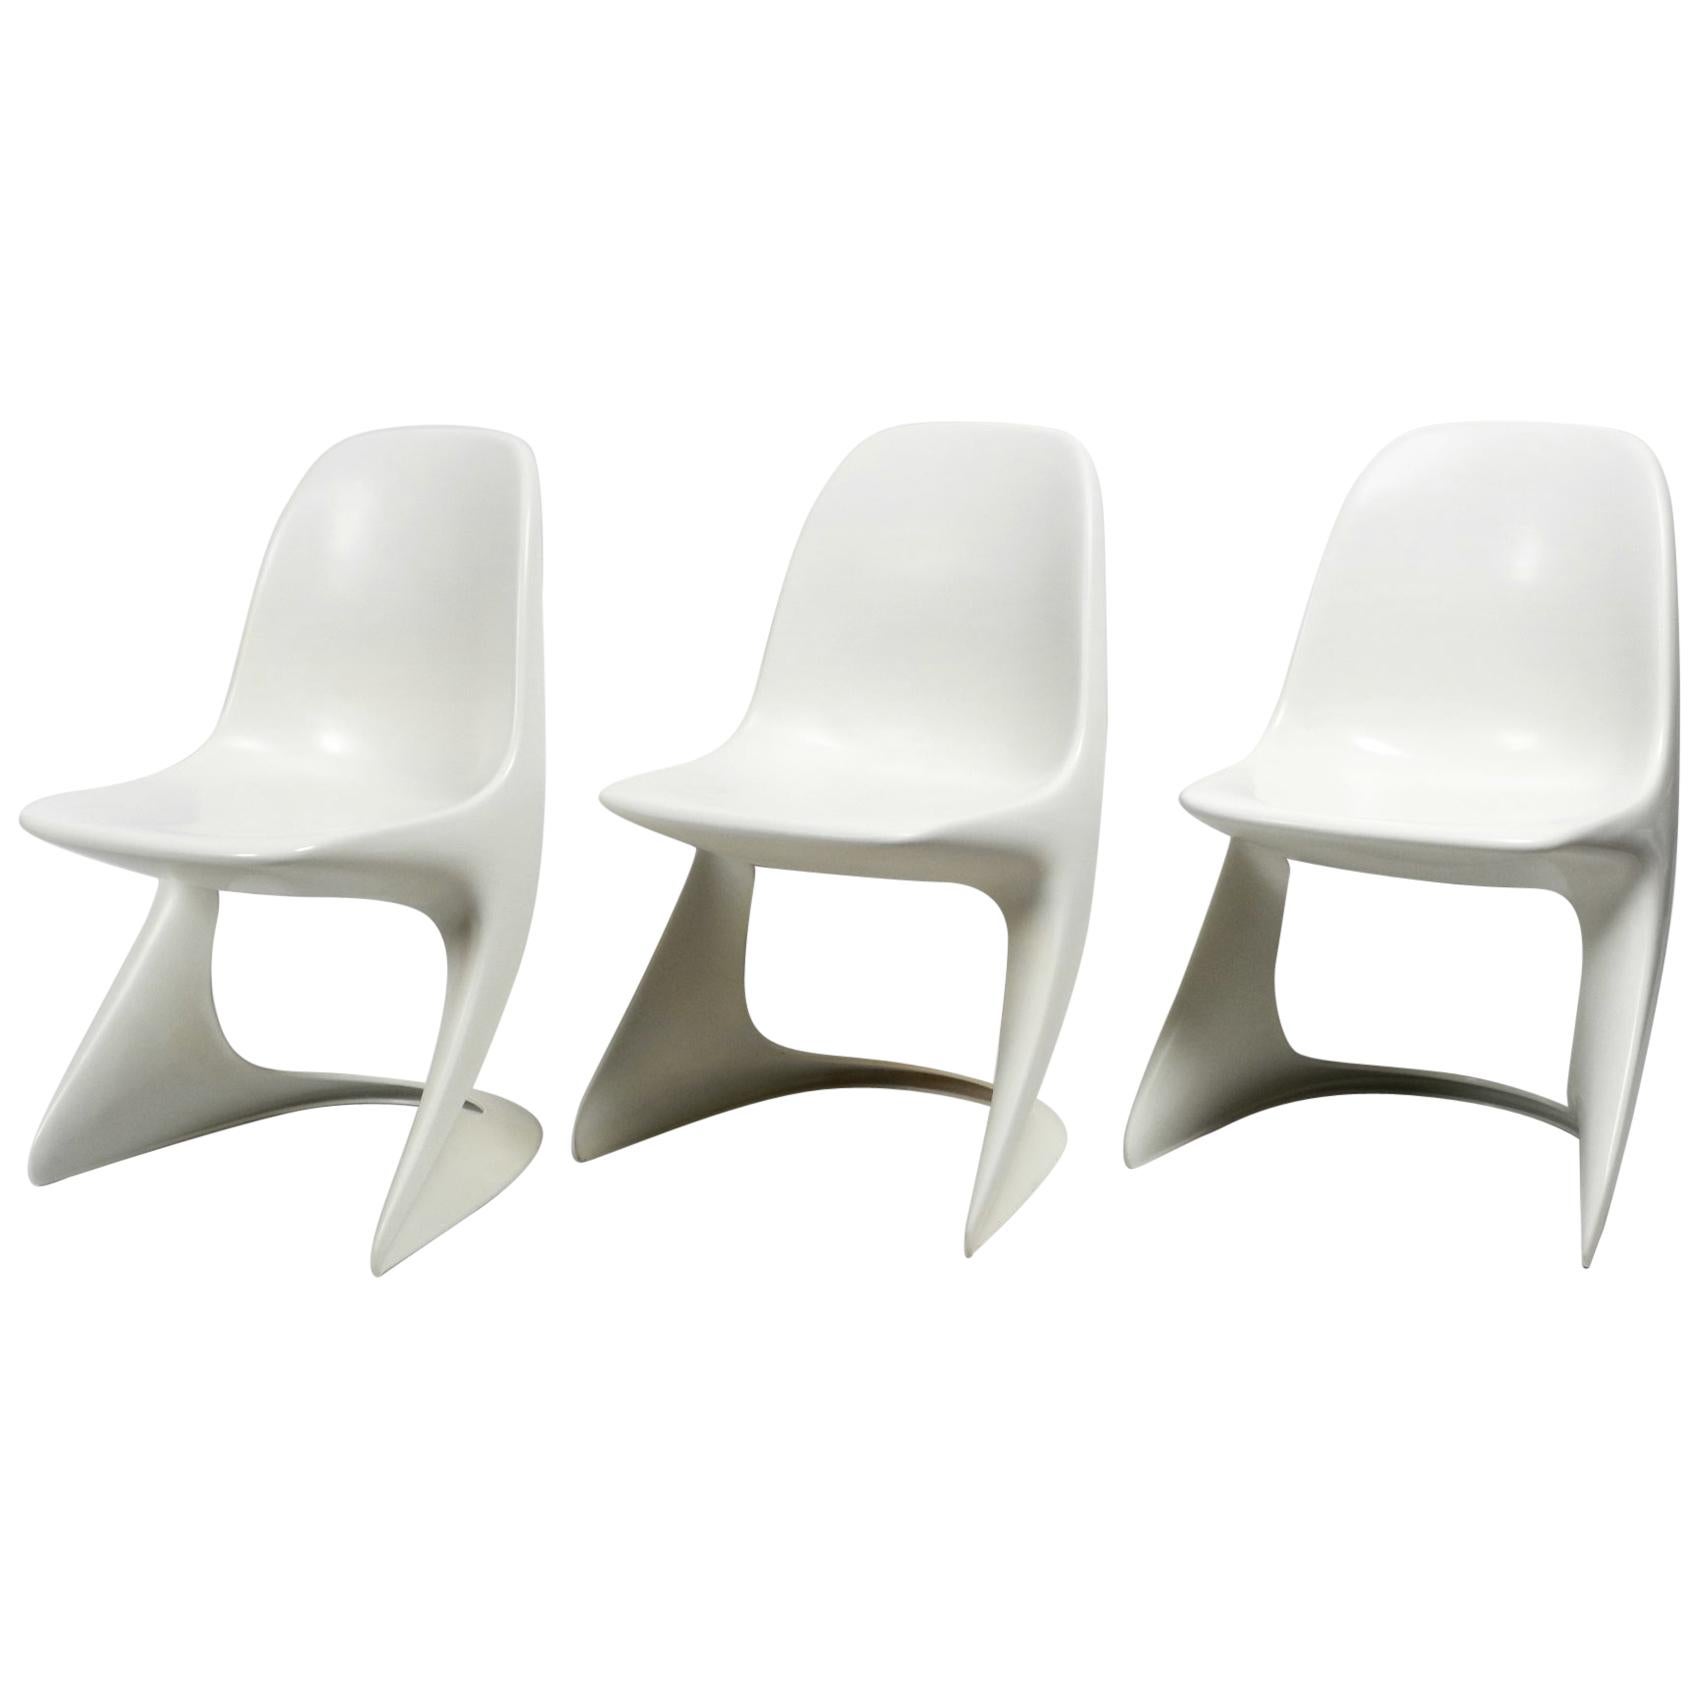 Three Original Casalino Chairs from Casala Model 2004/2005 from 1973 and 1980